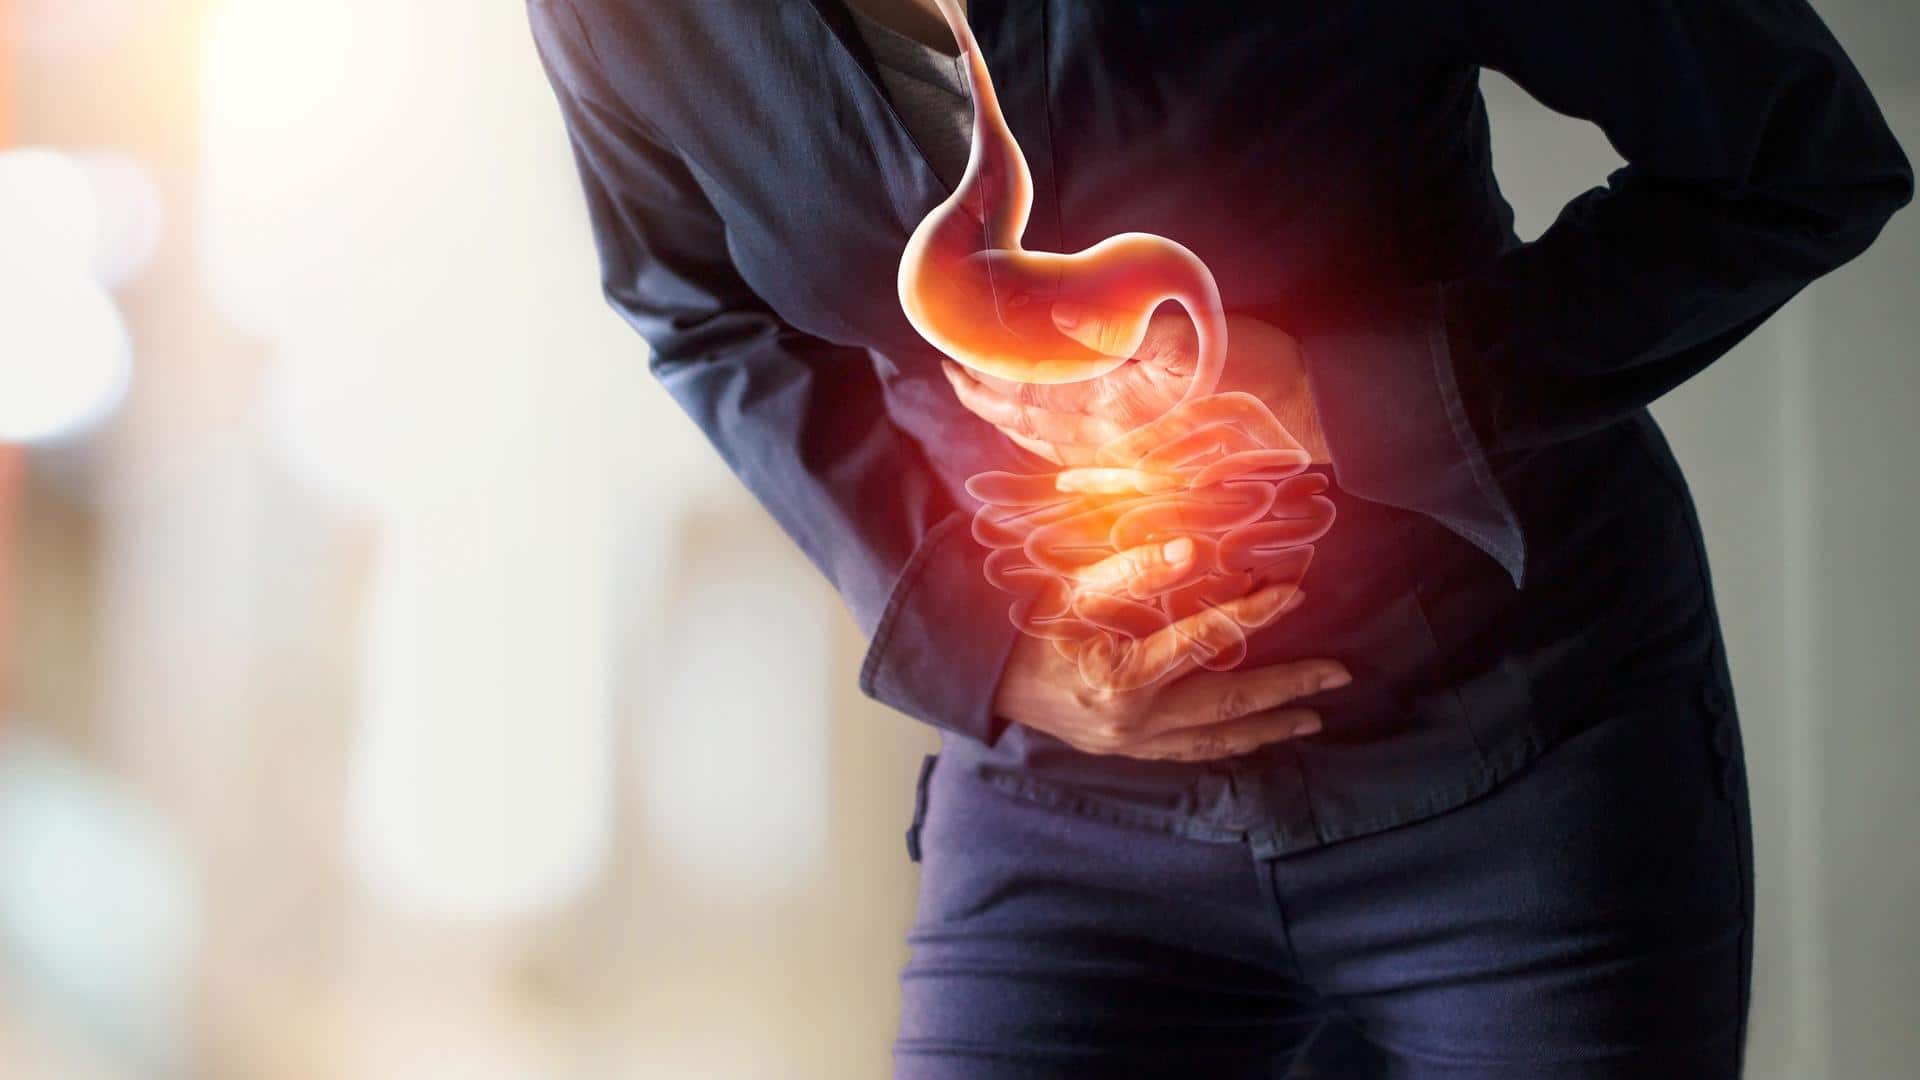 Dealing with acid reflux? Try these home remedies for relief